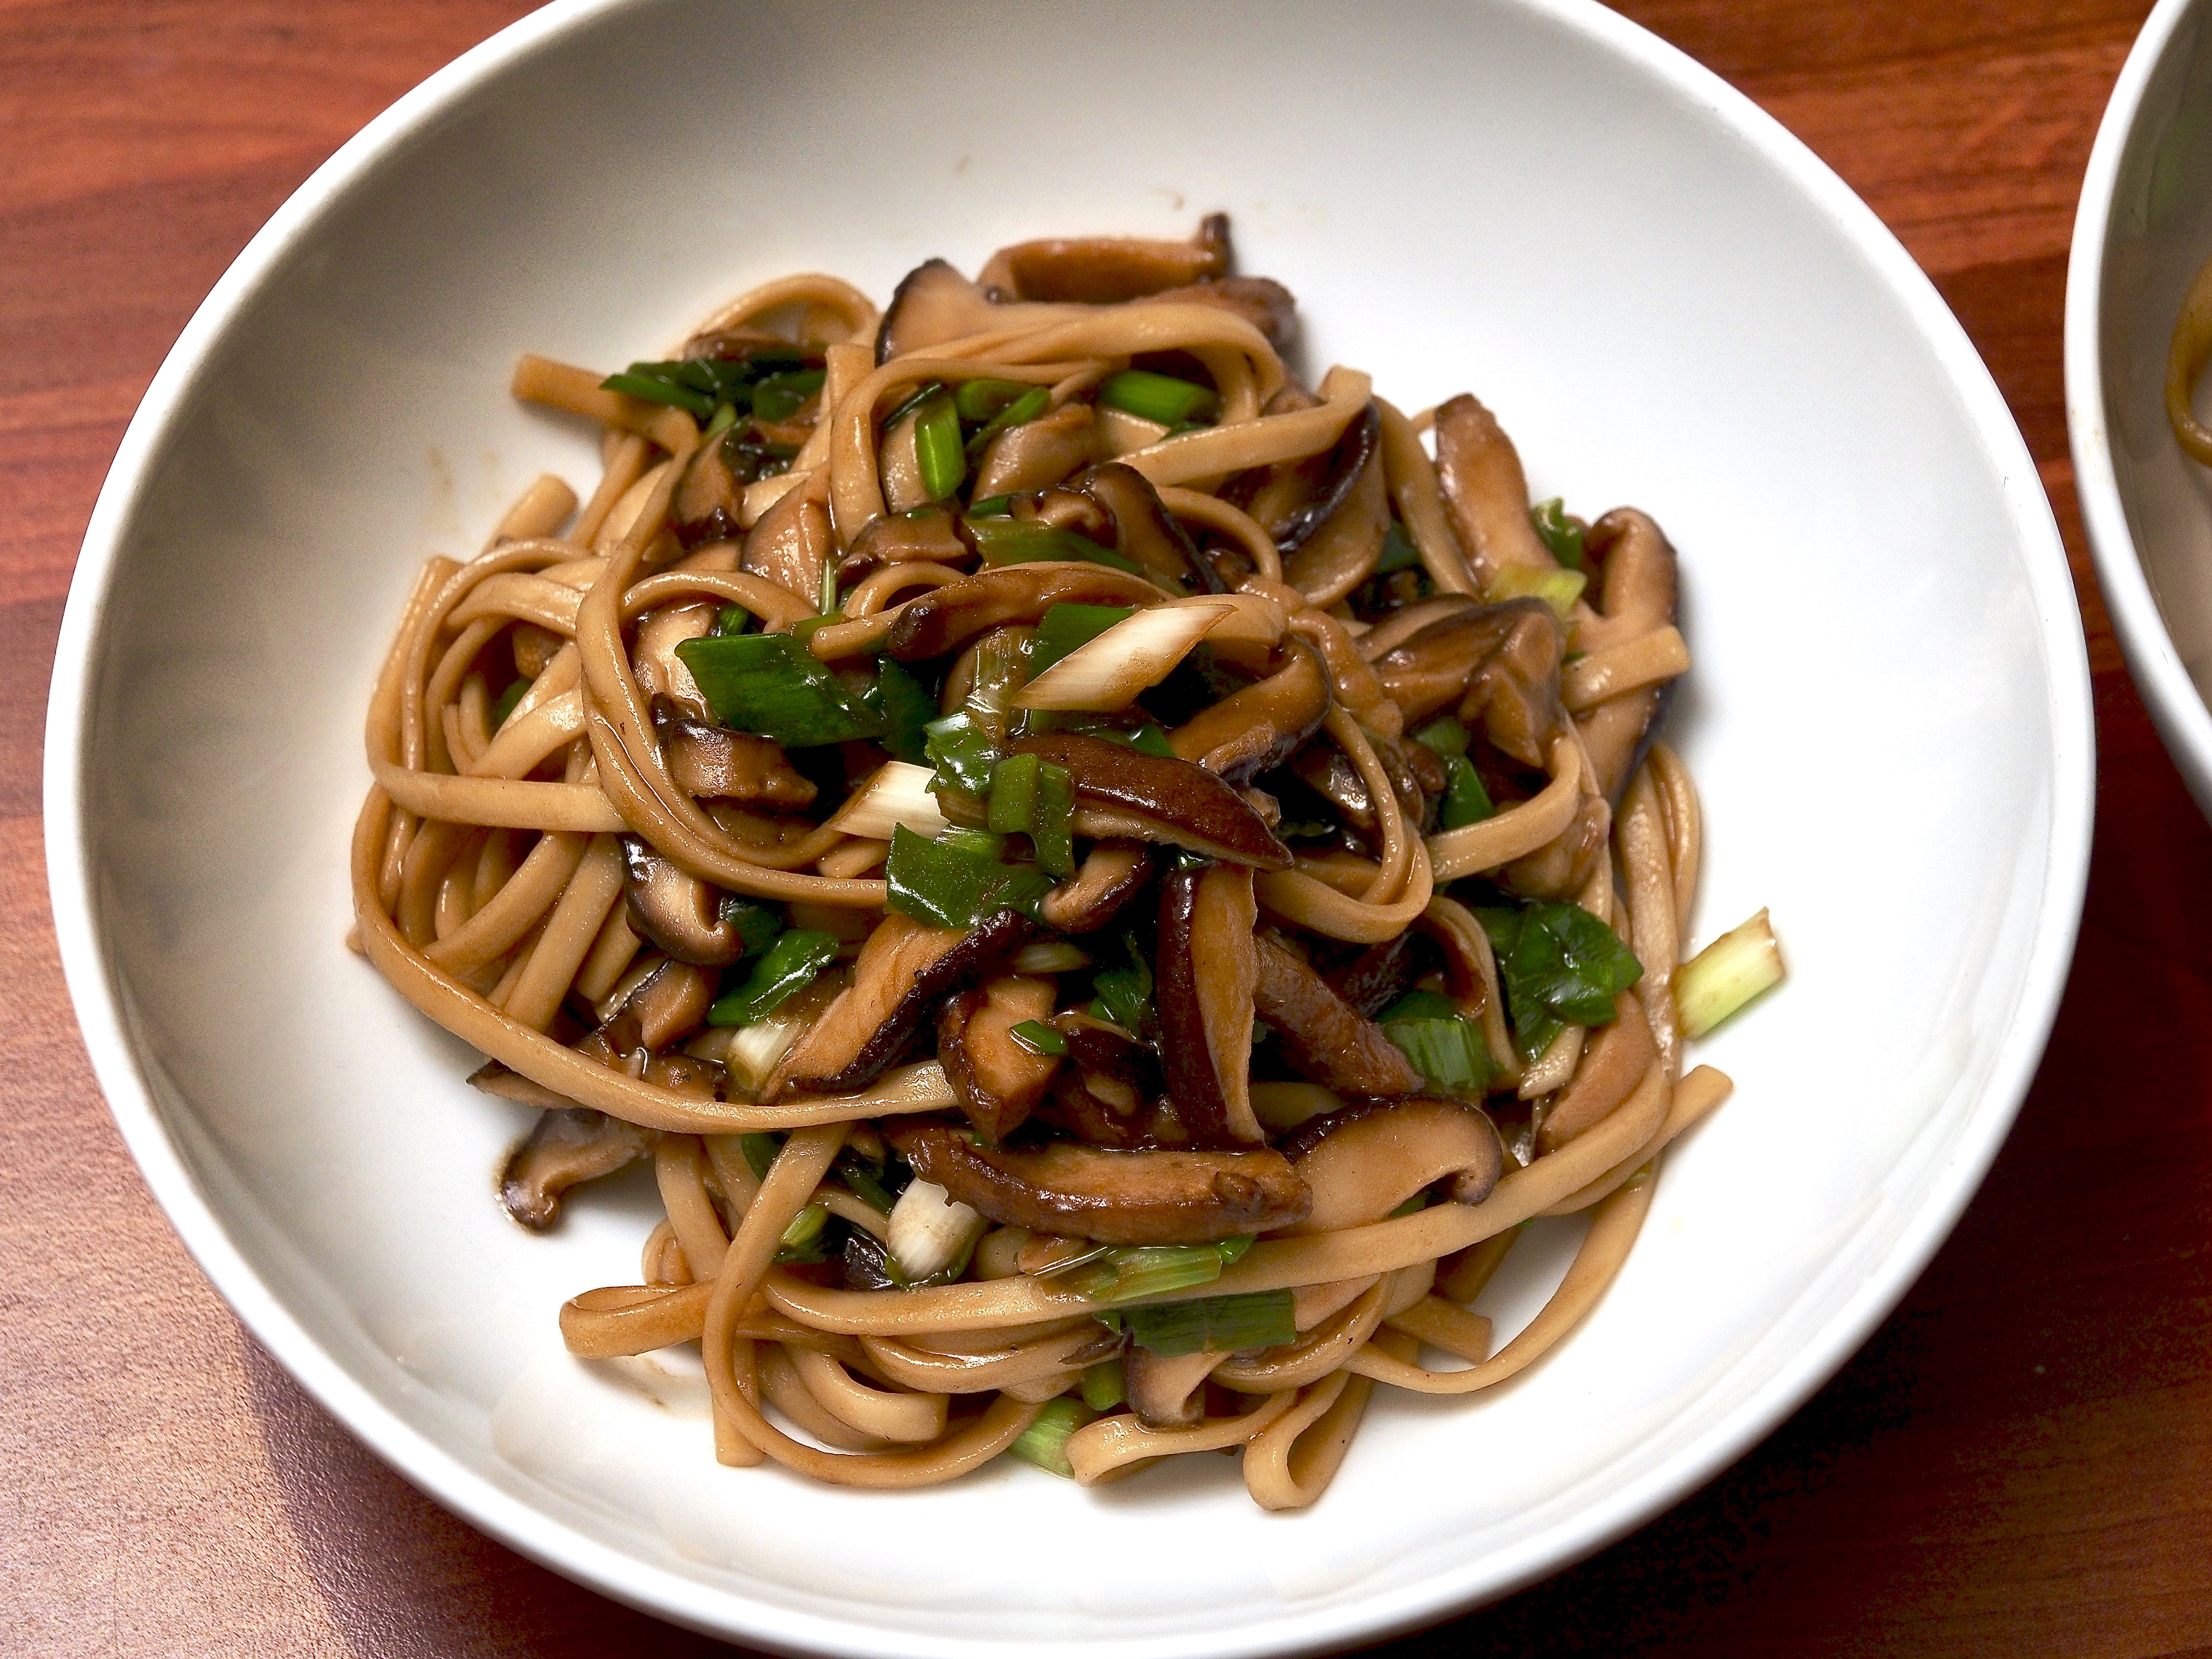 Noodles with shiitake mushrooms &amp; scallions